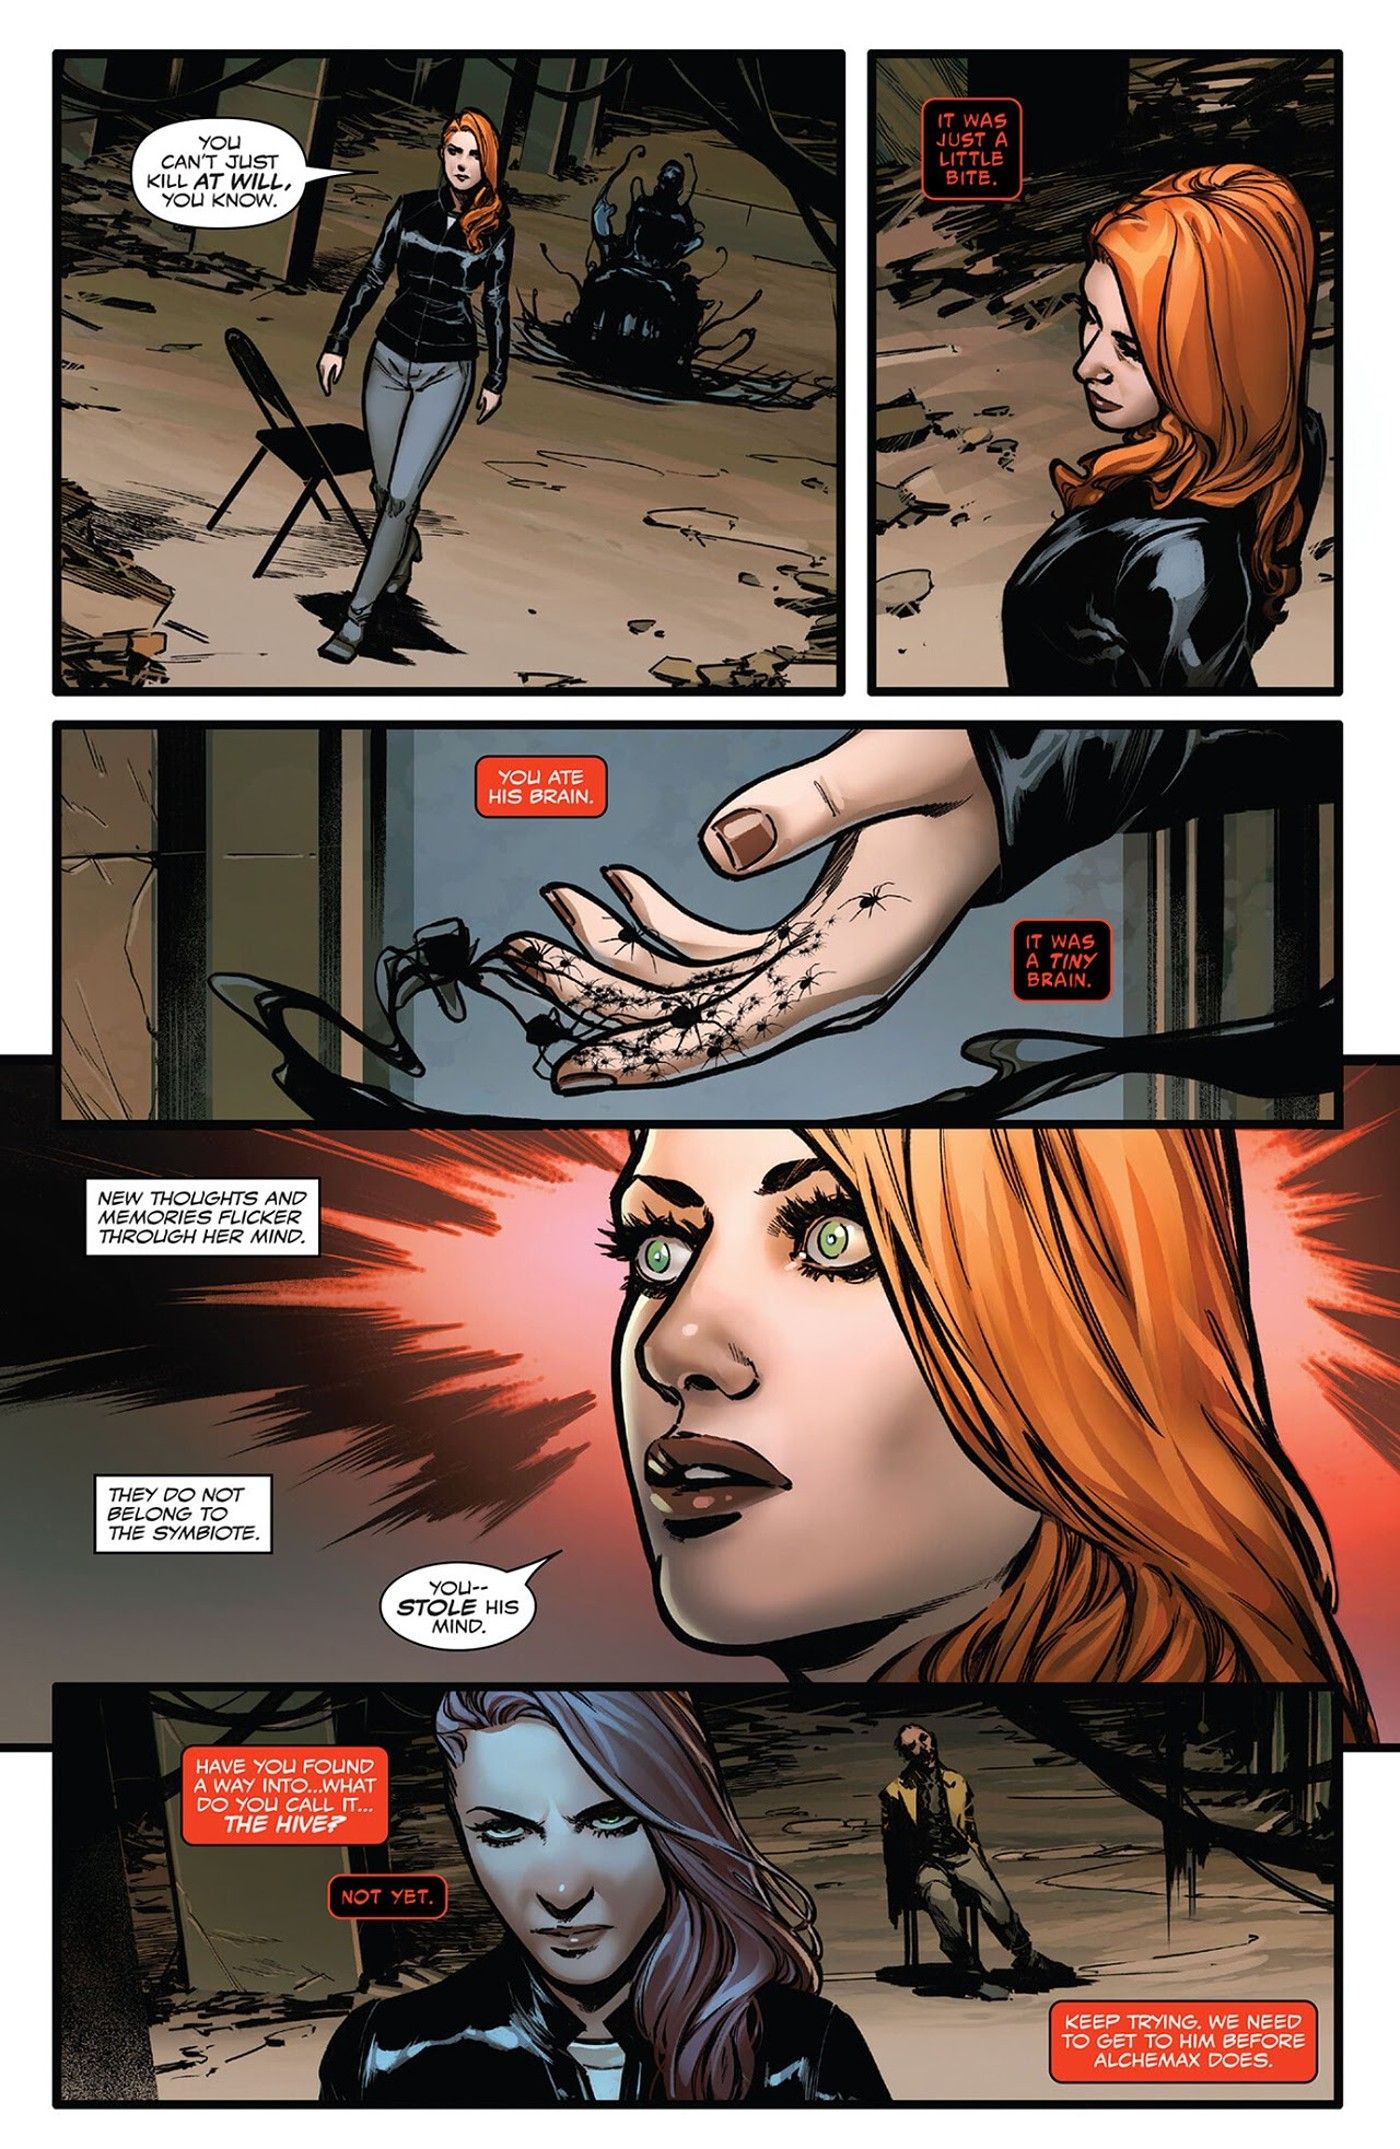 Black Widow’s New Symbiote Form Cements Her Status As Marvel’s Most Dangerous Spy